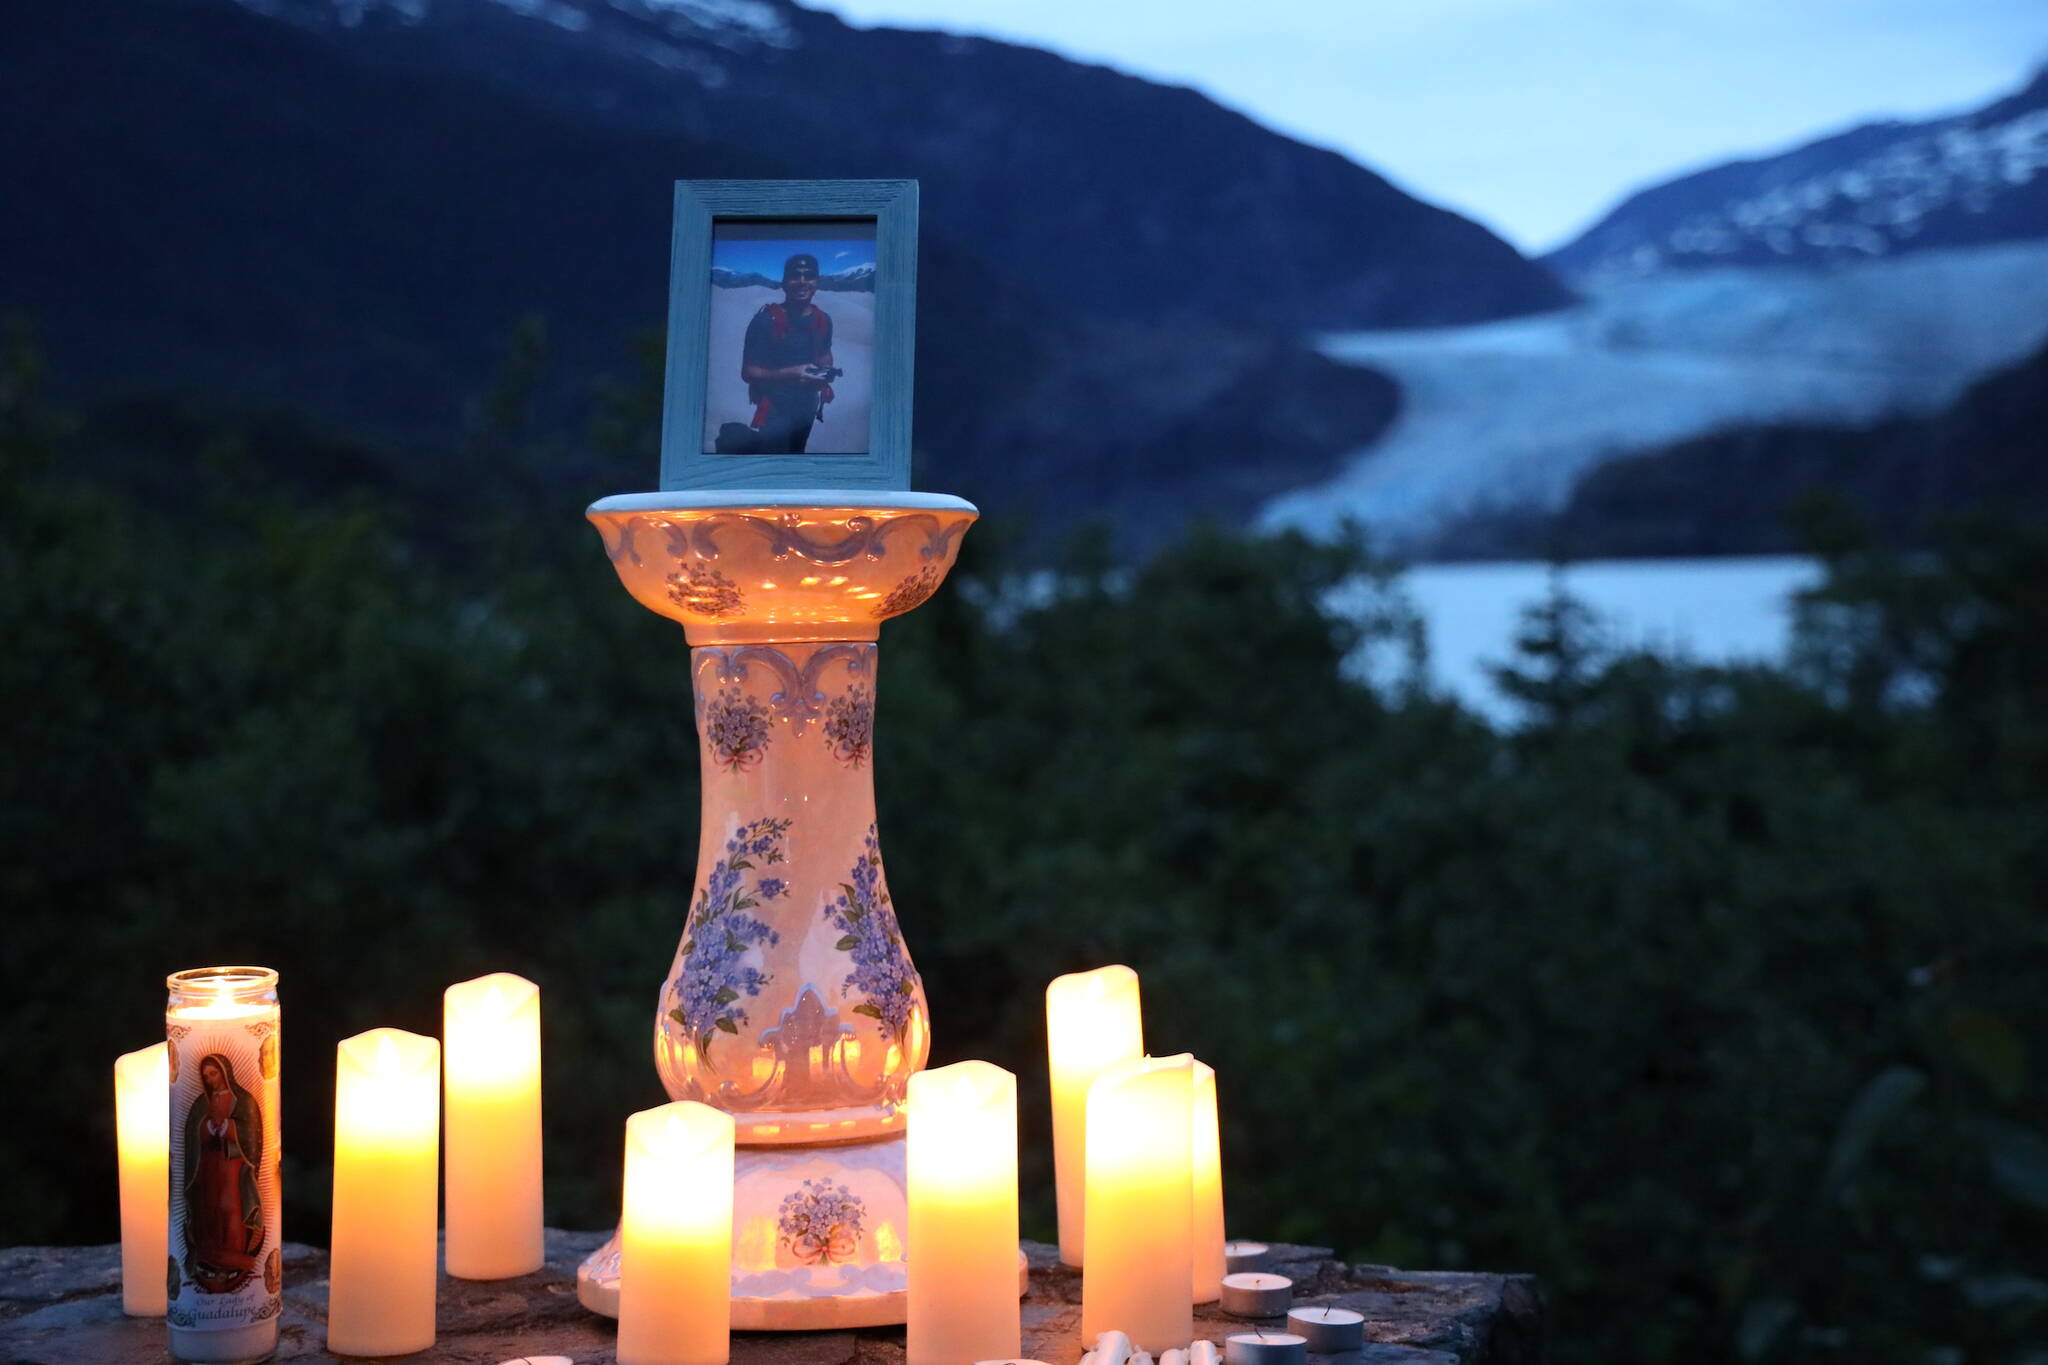 A candlelit vigil was held at the Mendenhall Glacier Visitor Center to honor Paul Rodriguez Jr., pictured, who drowned while kayaking on Mendenhall Lake last week. (Clarise Larson / Juneau Empire)